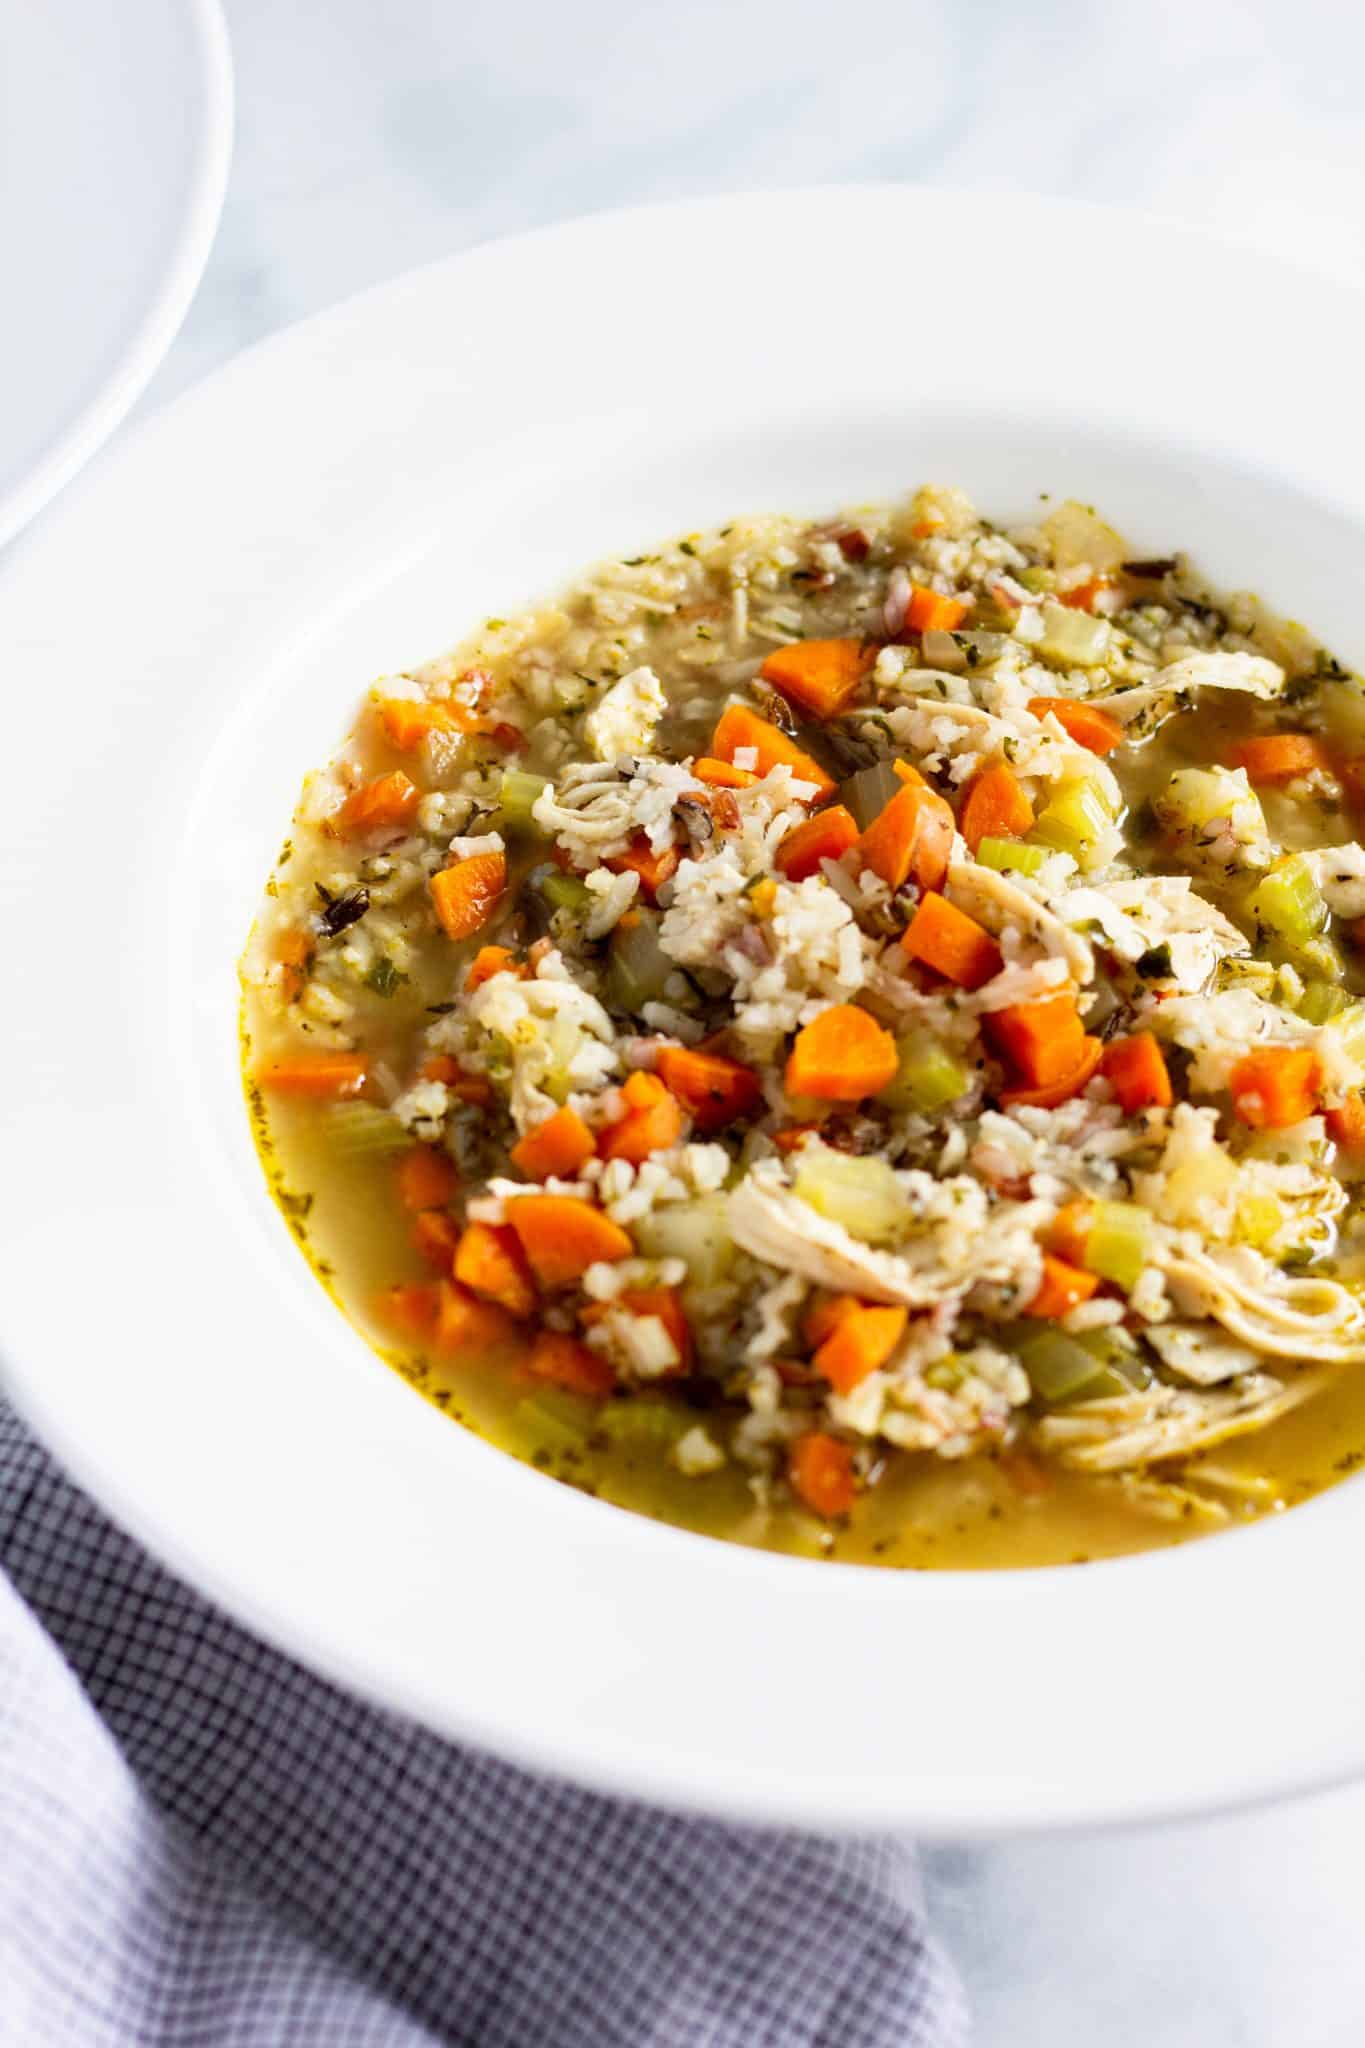 Wild Rice Soup #ThanksgivingLeftovers #Thanksgiving #FallSoup #HealthySoup